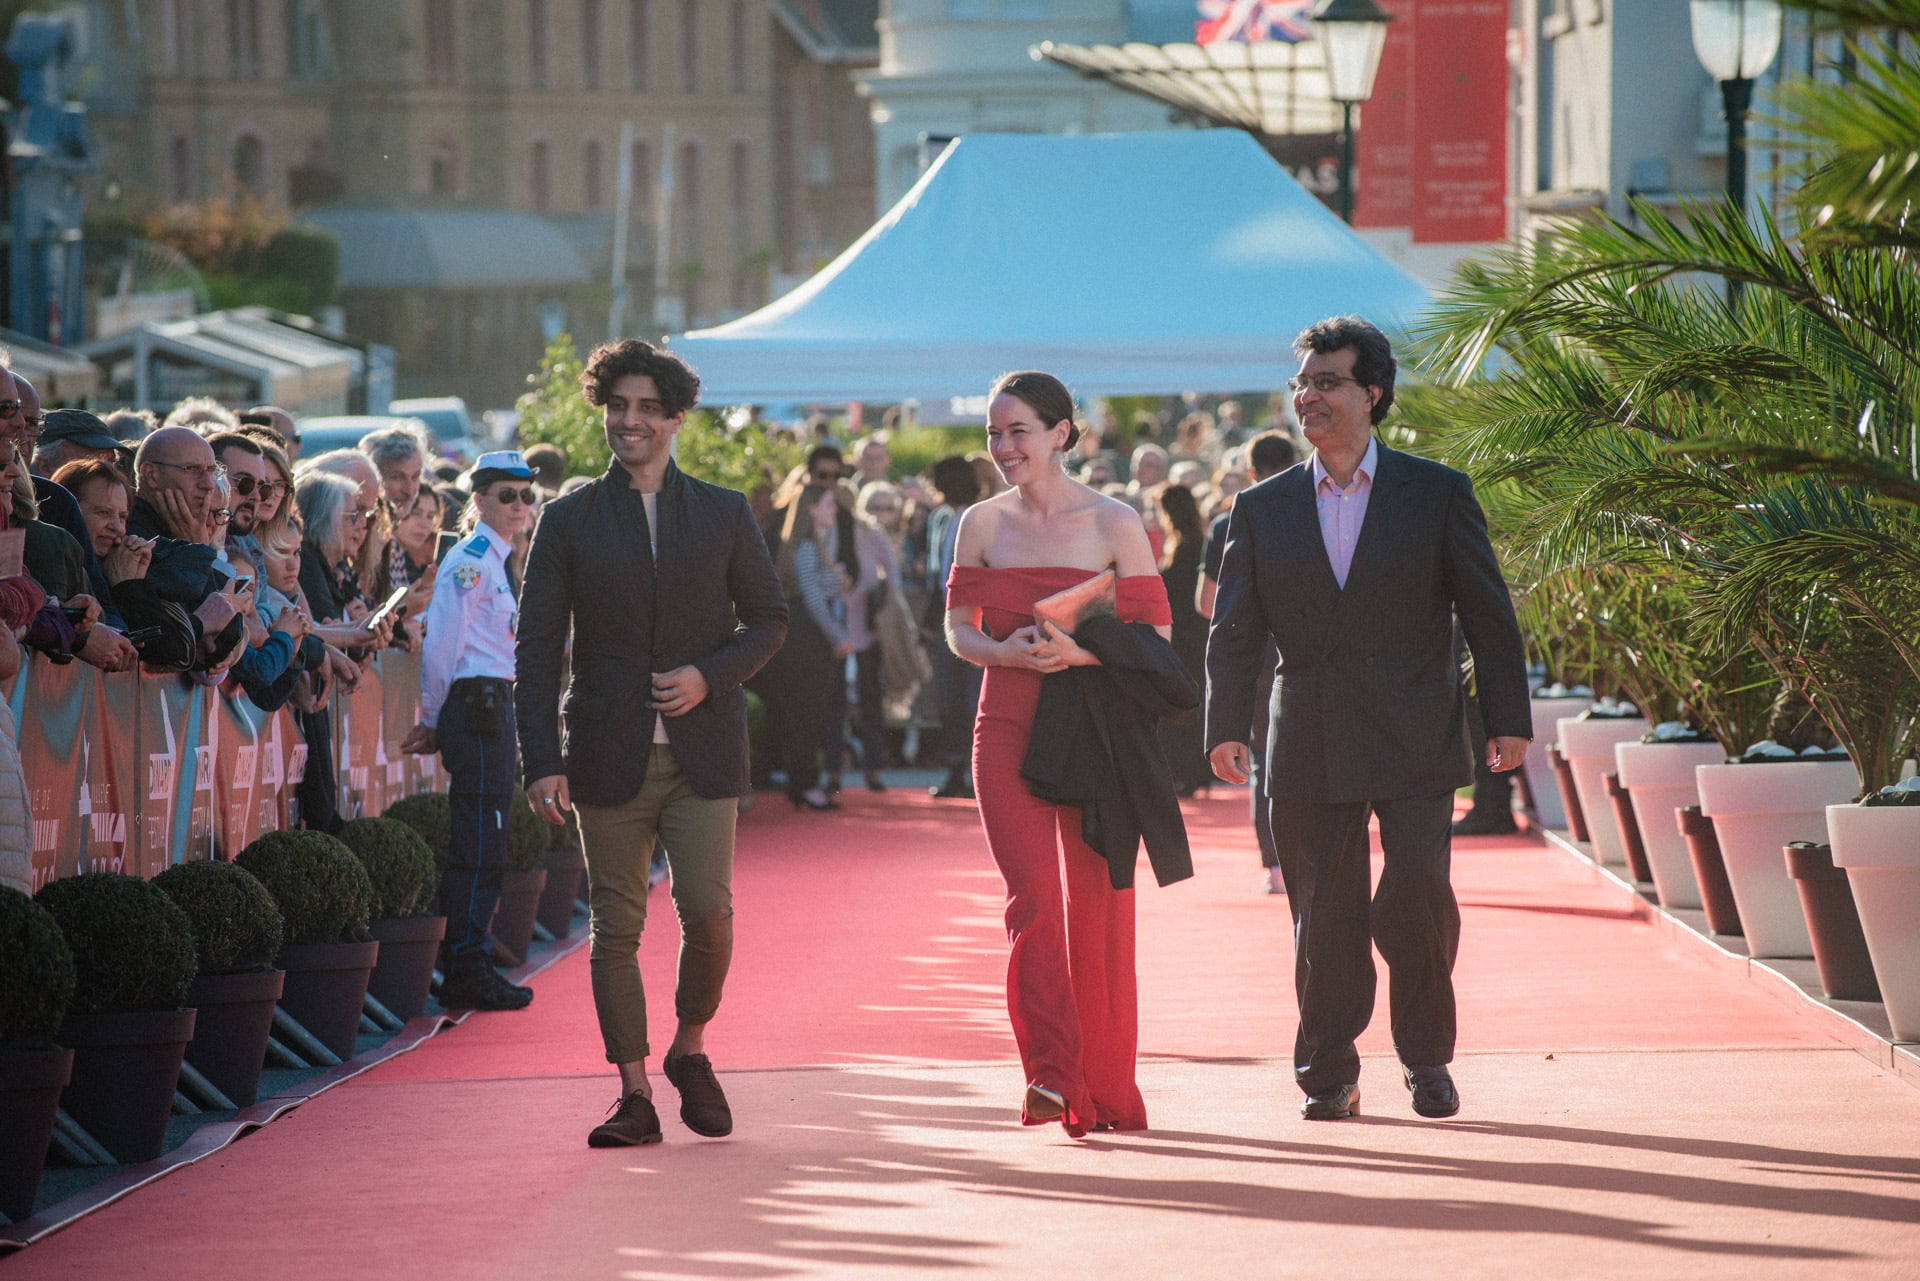 A red carpet scene. A man in a dark blazer and light trousers walks with a lady in a long red dress and another man in a dark suit. There are crowds and photographers.